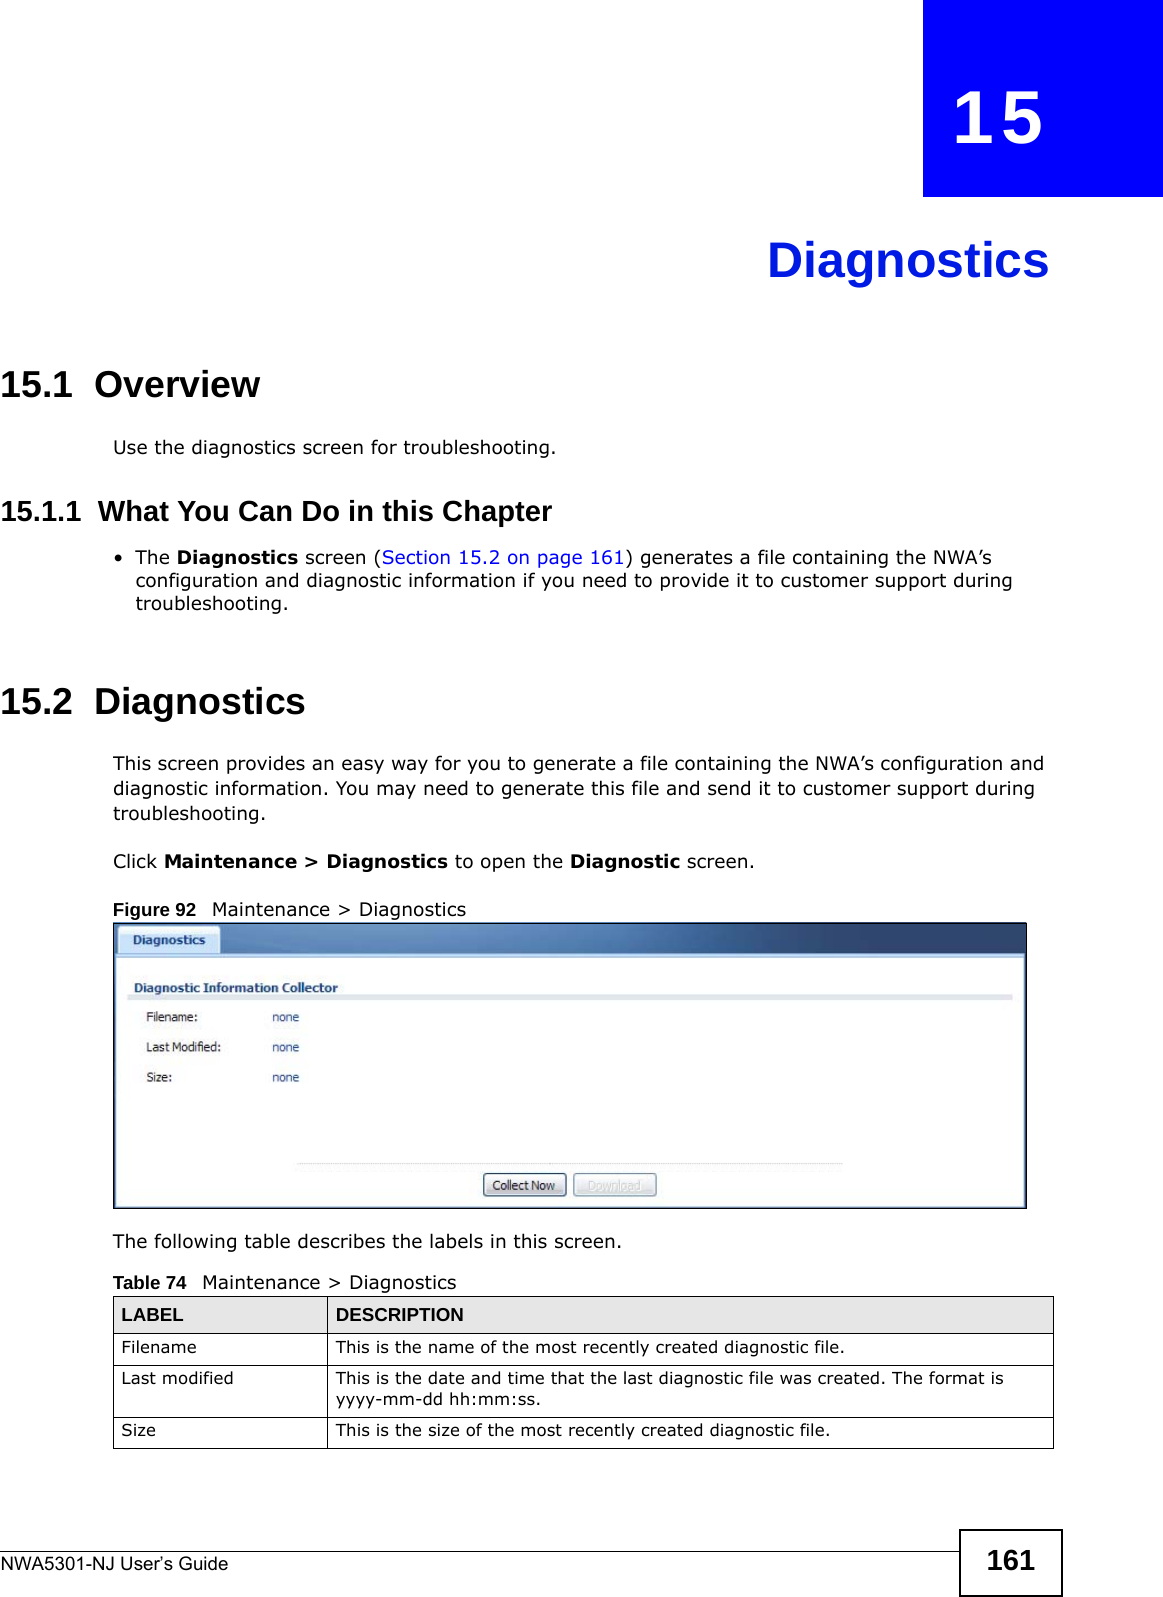 NWA5301-NJ User’s Guide 161CHAPTER   15Diagnostics15.1  OverviewUse the diagnostics screen for troubleshooting. 15.1.1  What You Can Do in this Chapter•The Diagnostics screen (Section 15.2 on page 161) generates a file containing the NWA’s configuration and diagnostic information if you need to provide it to customer support during troubleshooting.15.2  Diagnostics  This screen provides an easy way for you to generate a file containing the NWA’s configuration and diagnostic information. You may need to generate this file and send it to customer support during troubleshooting.Click Maintenance &gt; Diagnostics to open the Diagnostic screen. Figure 92   Maintenance &gt; Diagnostics  The following table describes the labels in this screen.  Table 74   Maintenance &gt; DiagnosticsLABEL DESCRIPTIONFilename This is the name of the most recently created diagnostic file.Last modified This is the date and time that the last diagnostic file was created. The format is yyyy-mm-dd hh:mm:ss.Size This is the size of the most recently created diagnostic file.